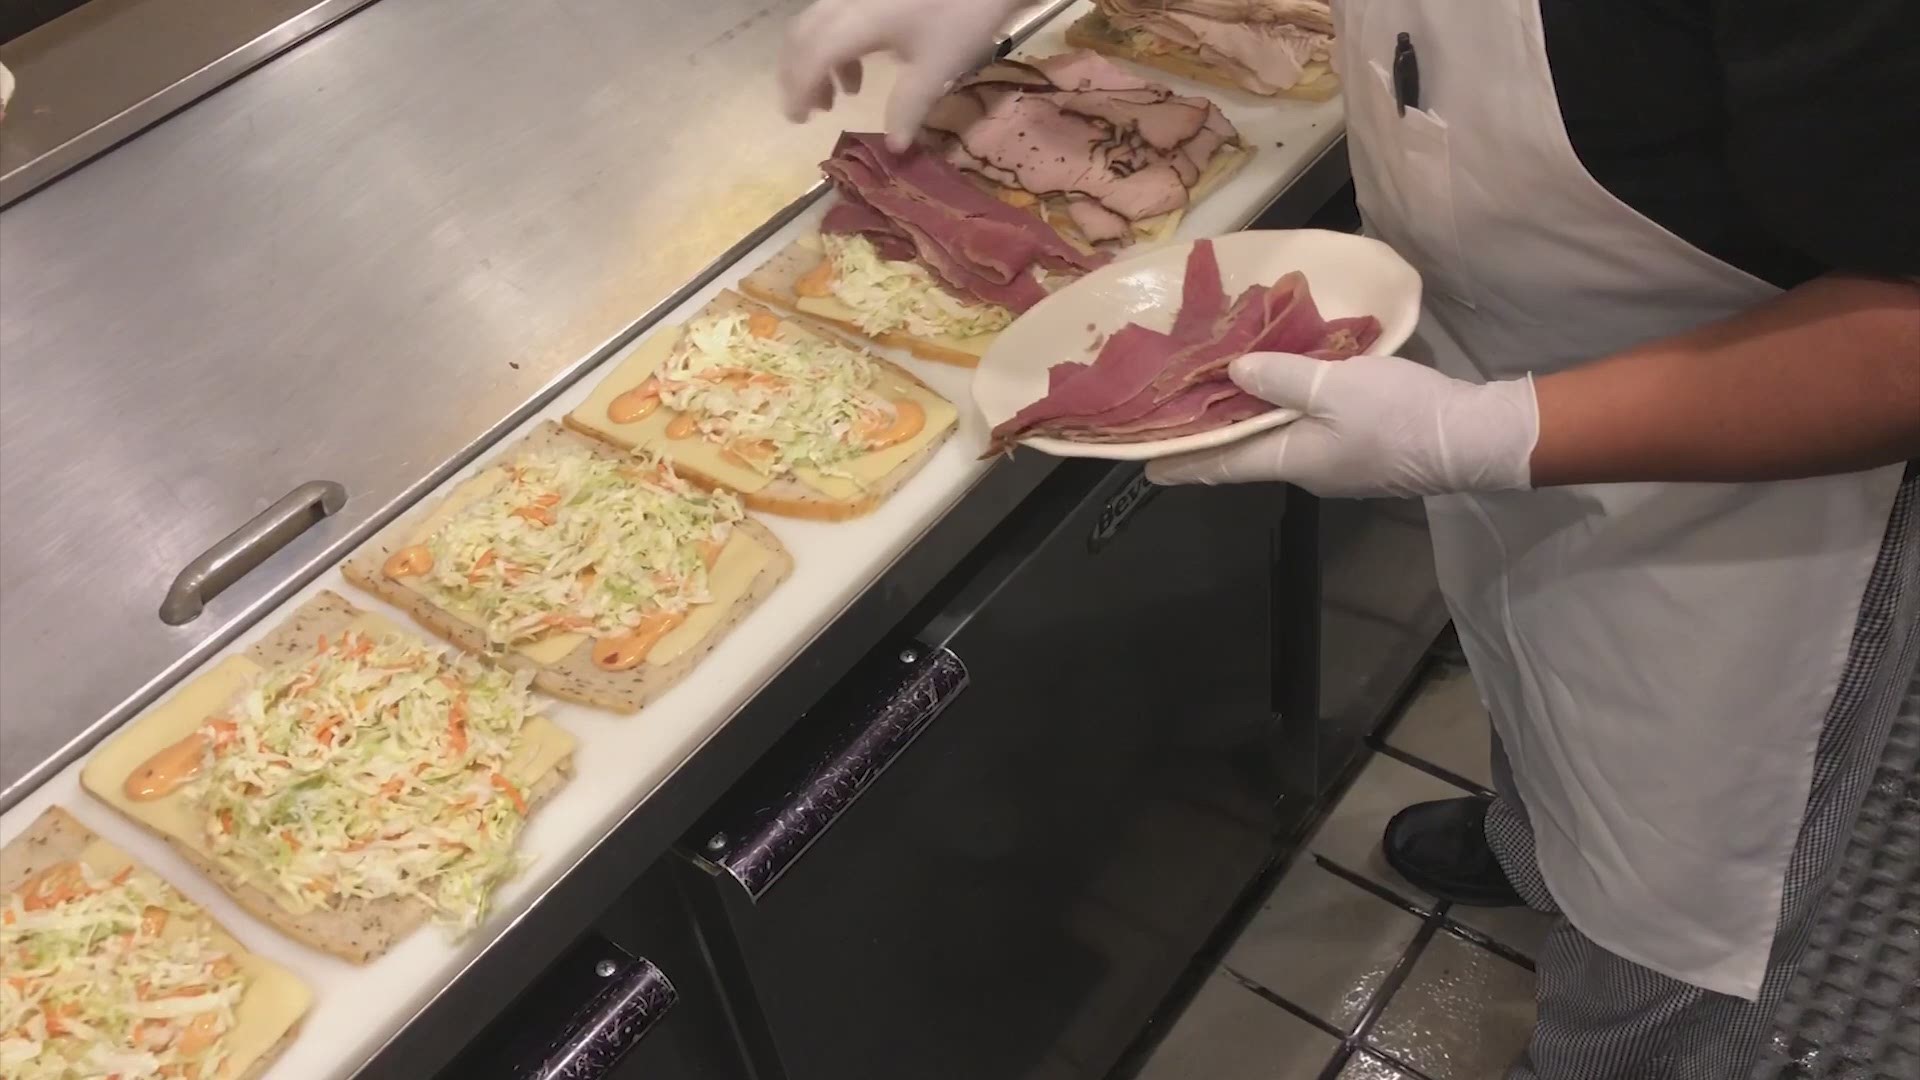 The Zellagabetsky is a 4 pound eight decker sandwich topped with corned beef, pastrami, turkey, roast beef, salami, tongue and Swiss cheese. And if that's not enough for you, each layer is smothered with creamy coleslaw and Russian dressing.